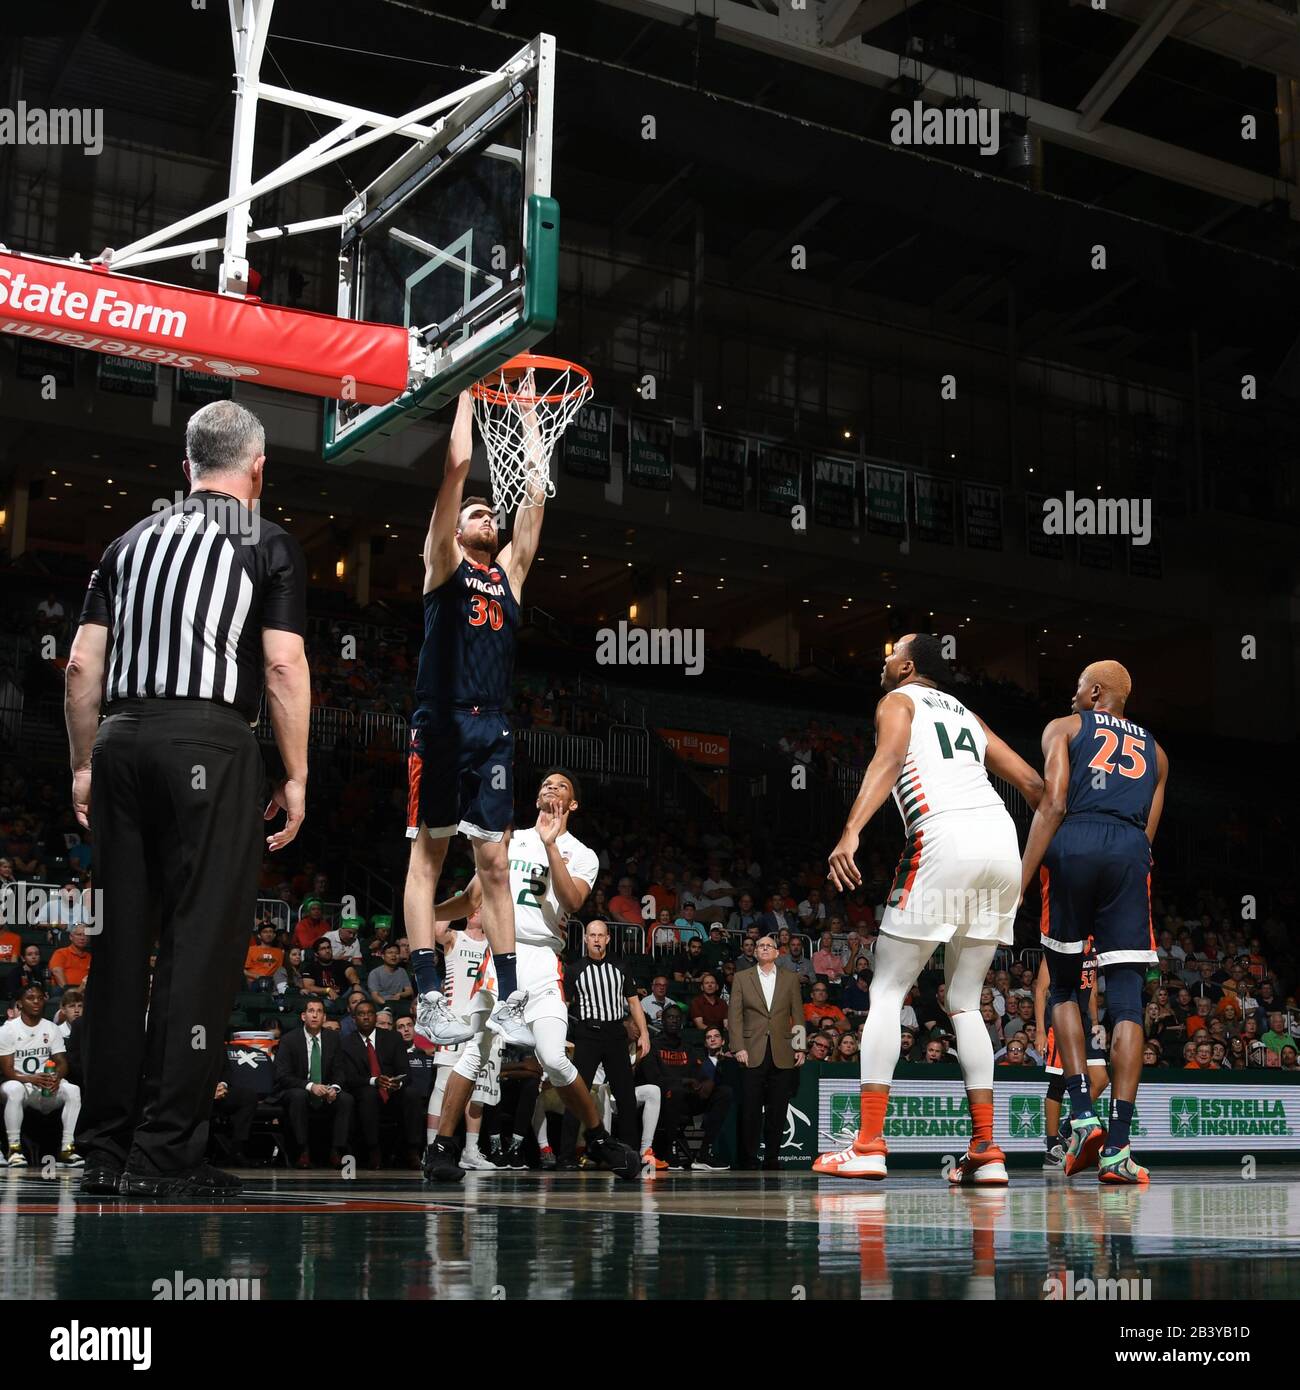 March 4, 2020: Jay Huff #30 of Virginia in action during the NCAA basketball game between the Miami Hurricanes and the Virginia Cavaliers in Coral Gables, Florida. The Cavaliers defeated the 'Canes 46-44. Stock Photo